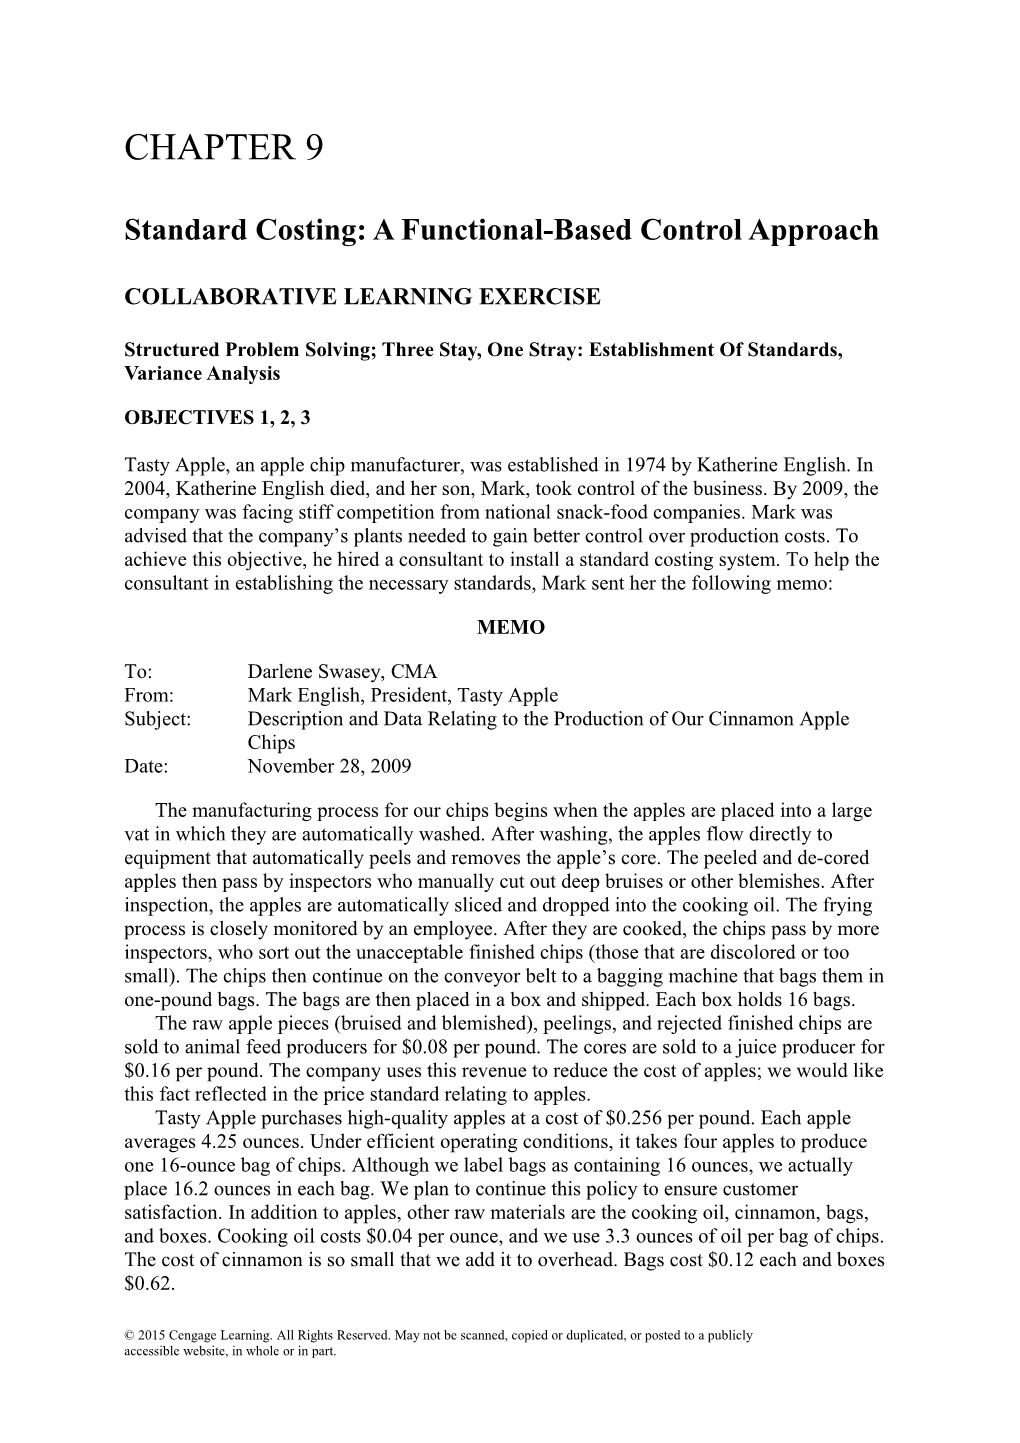 Standard Costing: a Functional-Based Control Approach